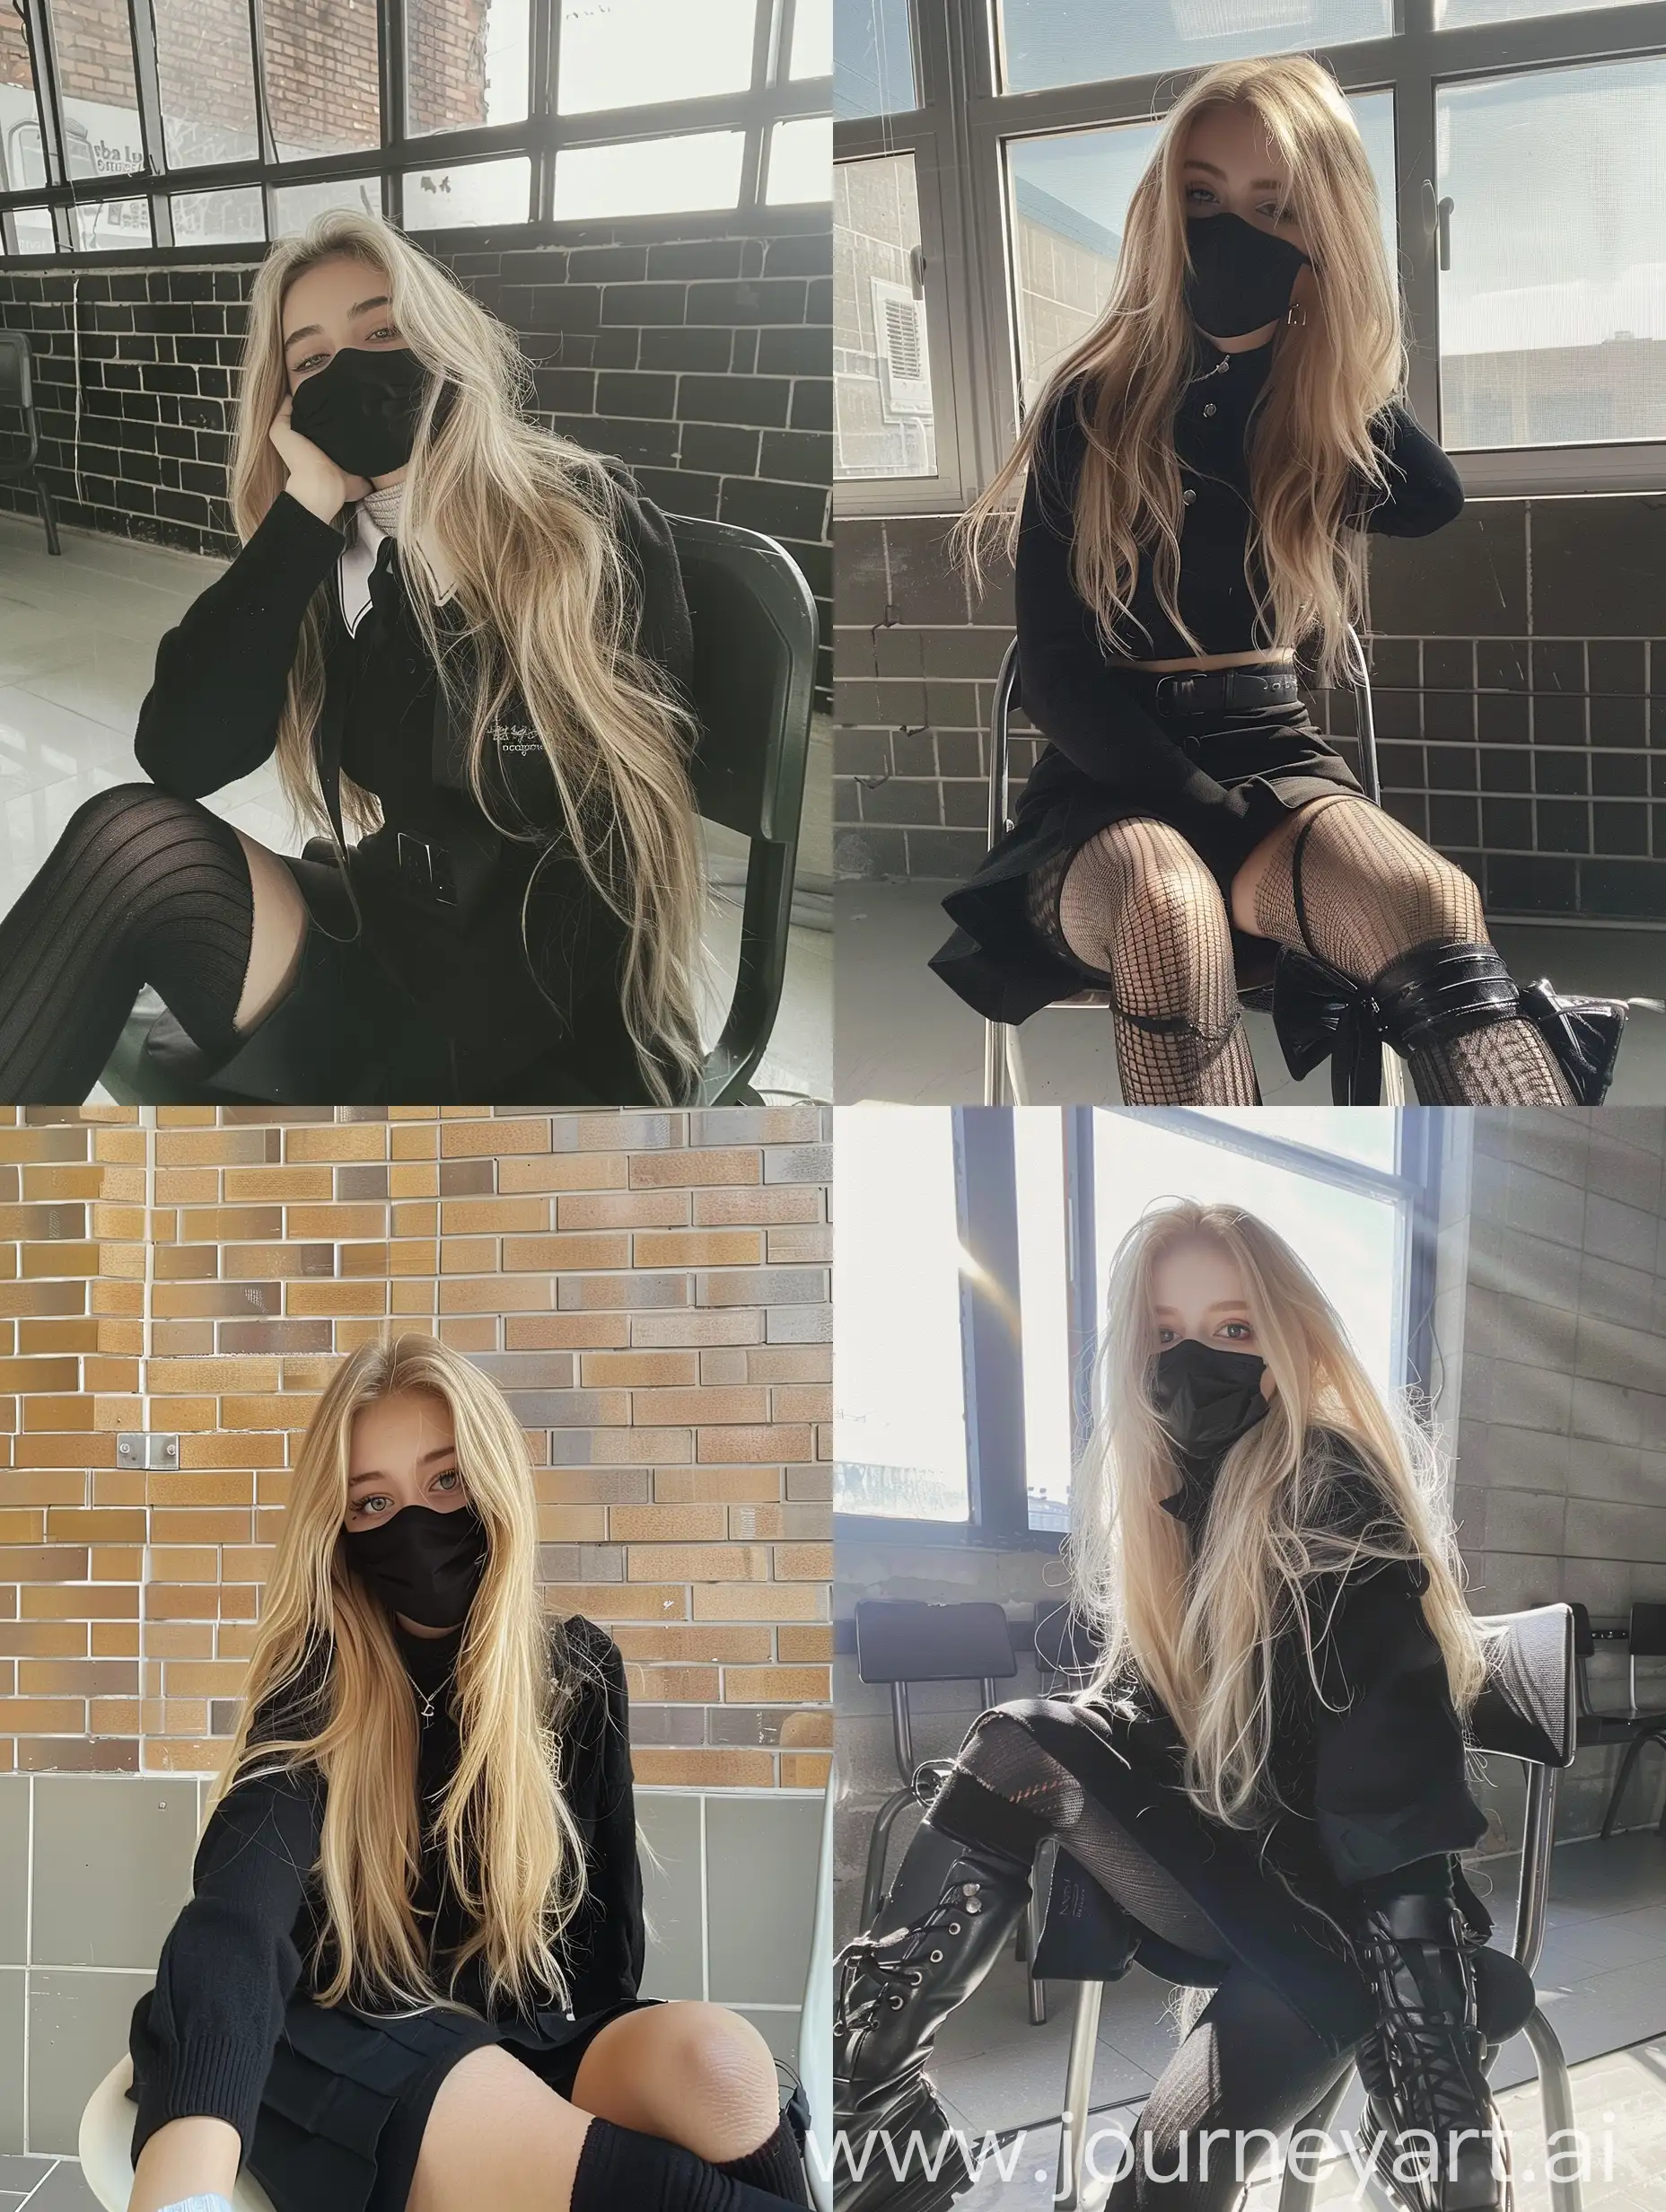 1  girl,    long  blond  hair ,   22  years  old,    influencer,    beauty   ,     in  the  school    ,school black  uniform  ,  makeup,   wearing a black mask,     sitting  on  chair  ,    socks  and  boots,    no  effect,     selfie   , iphone  selfie,      no  filters ,   iphone  photo    natural